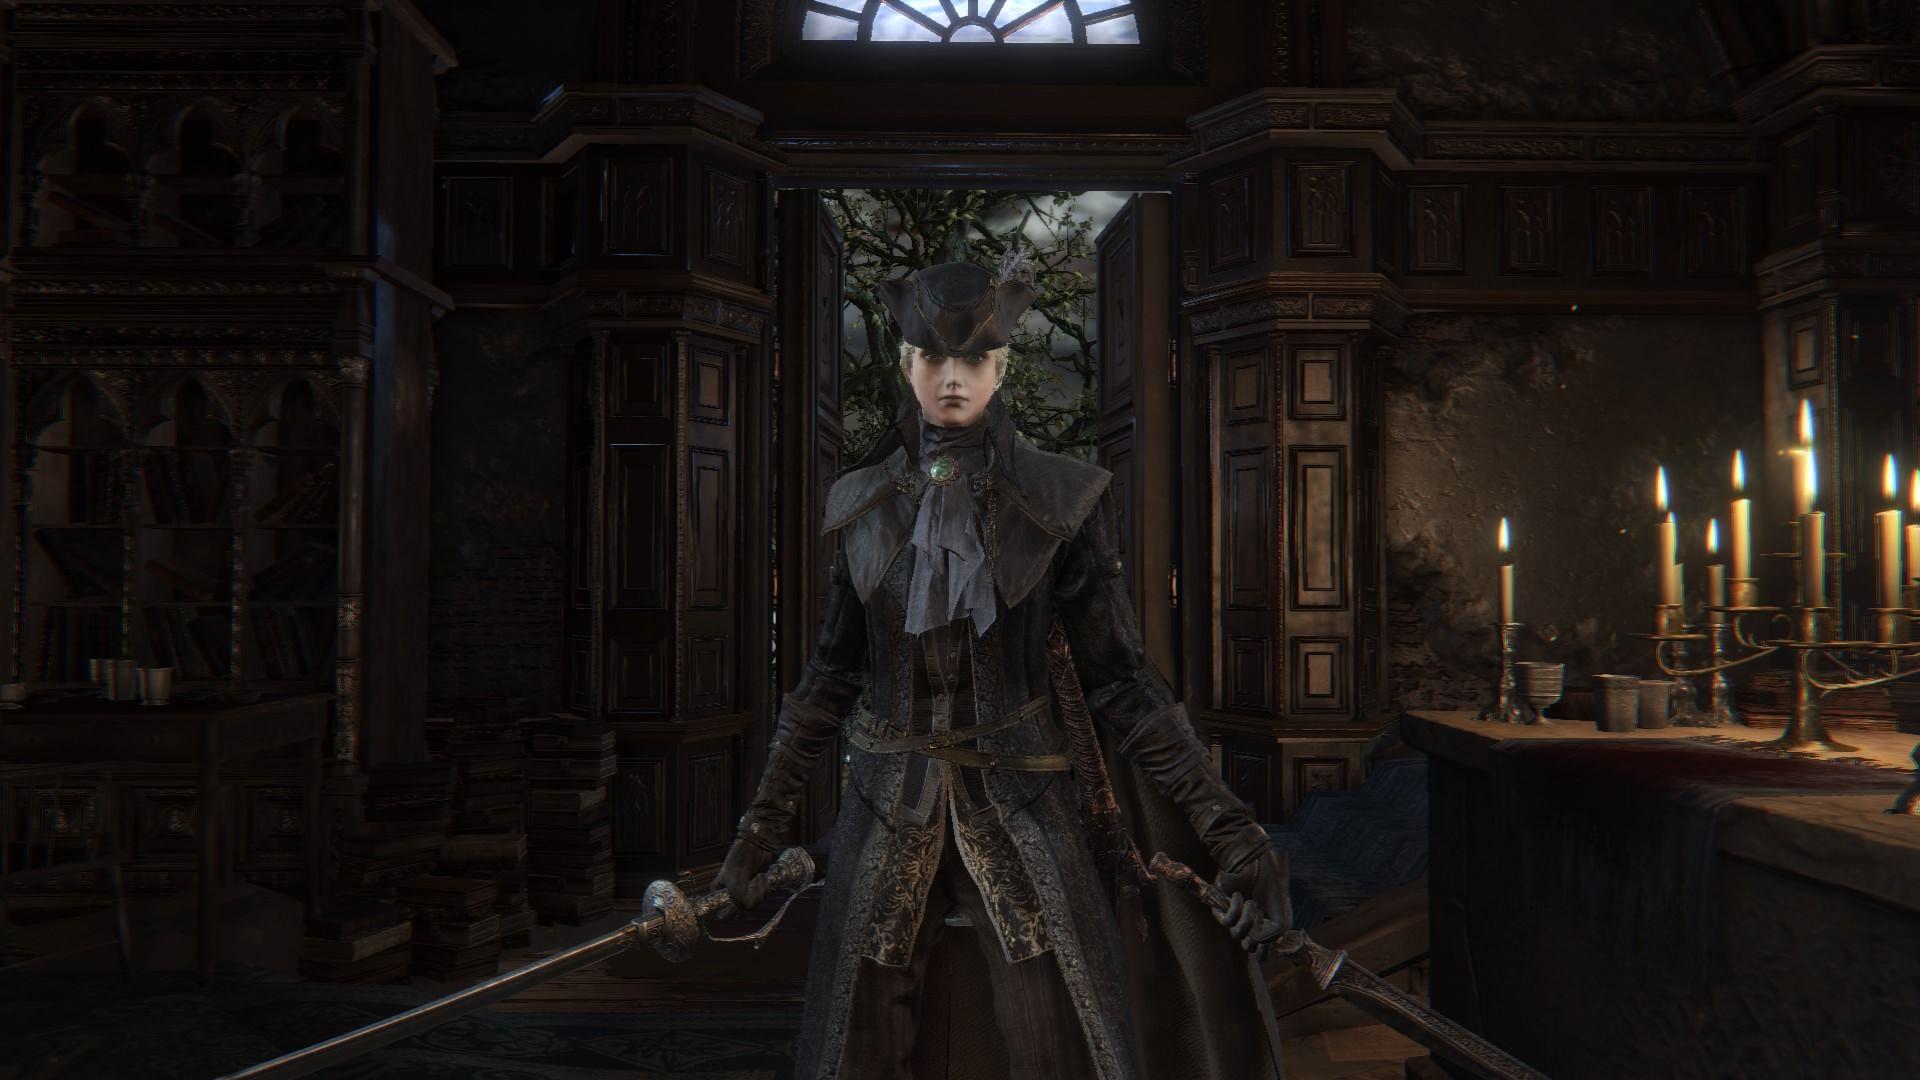 And Lady Maria - added by roxasftw at Based Burial Blade